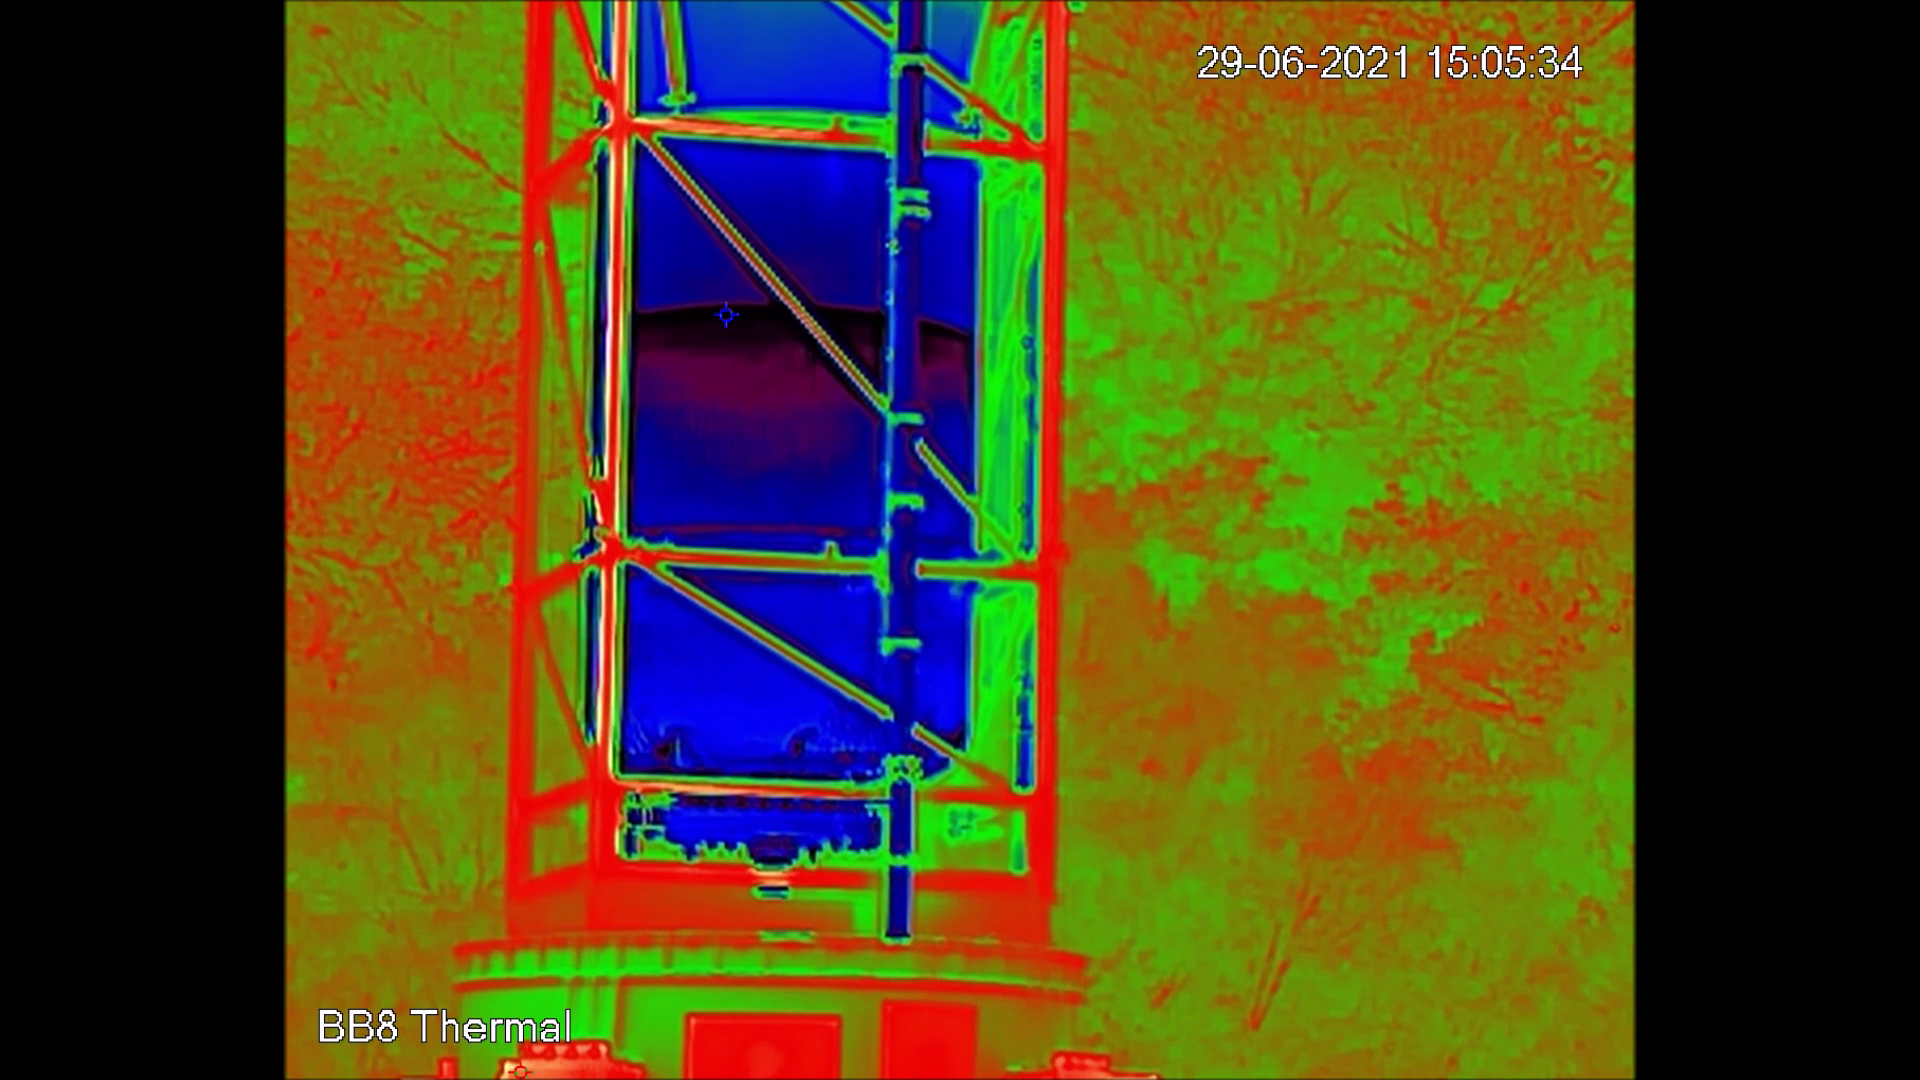 Thermal camera view of tanks during cryogenic tests